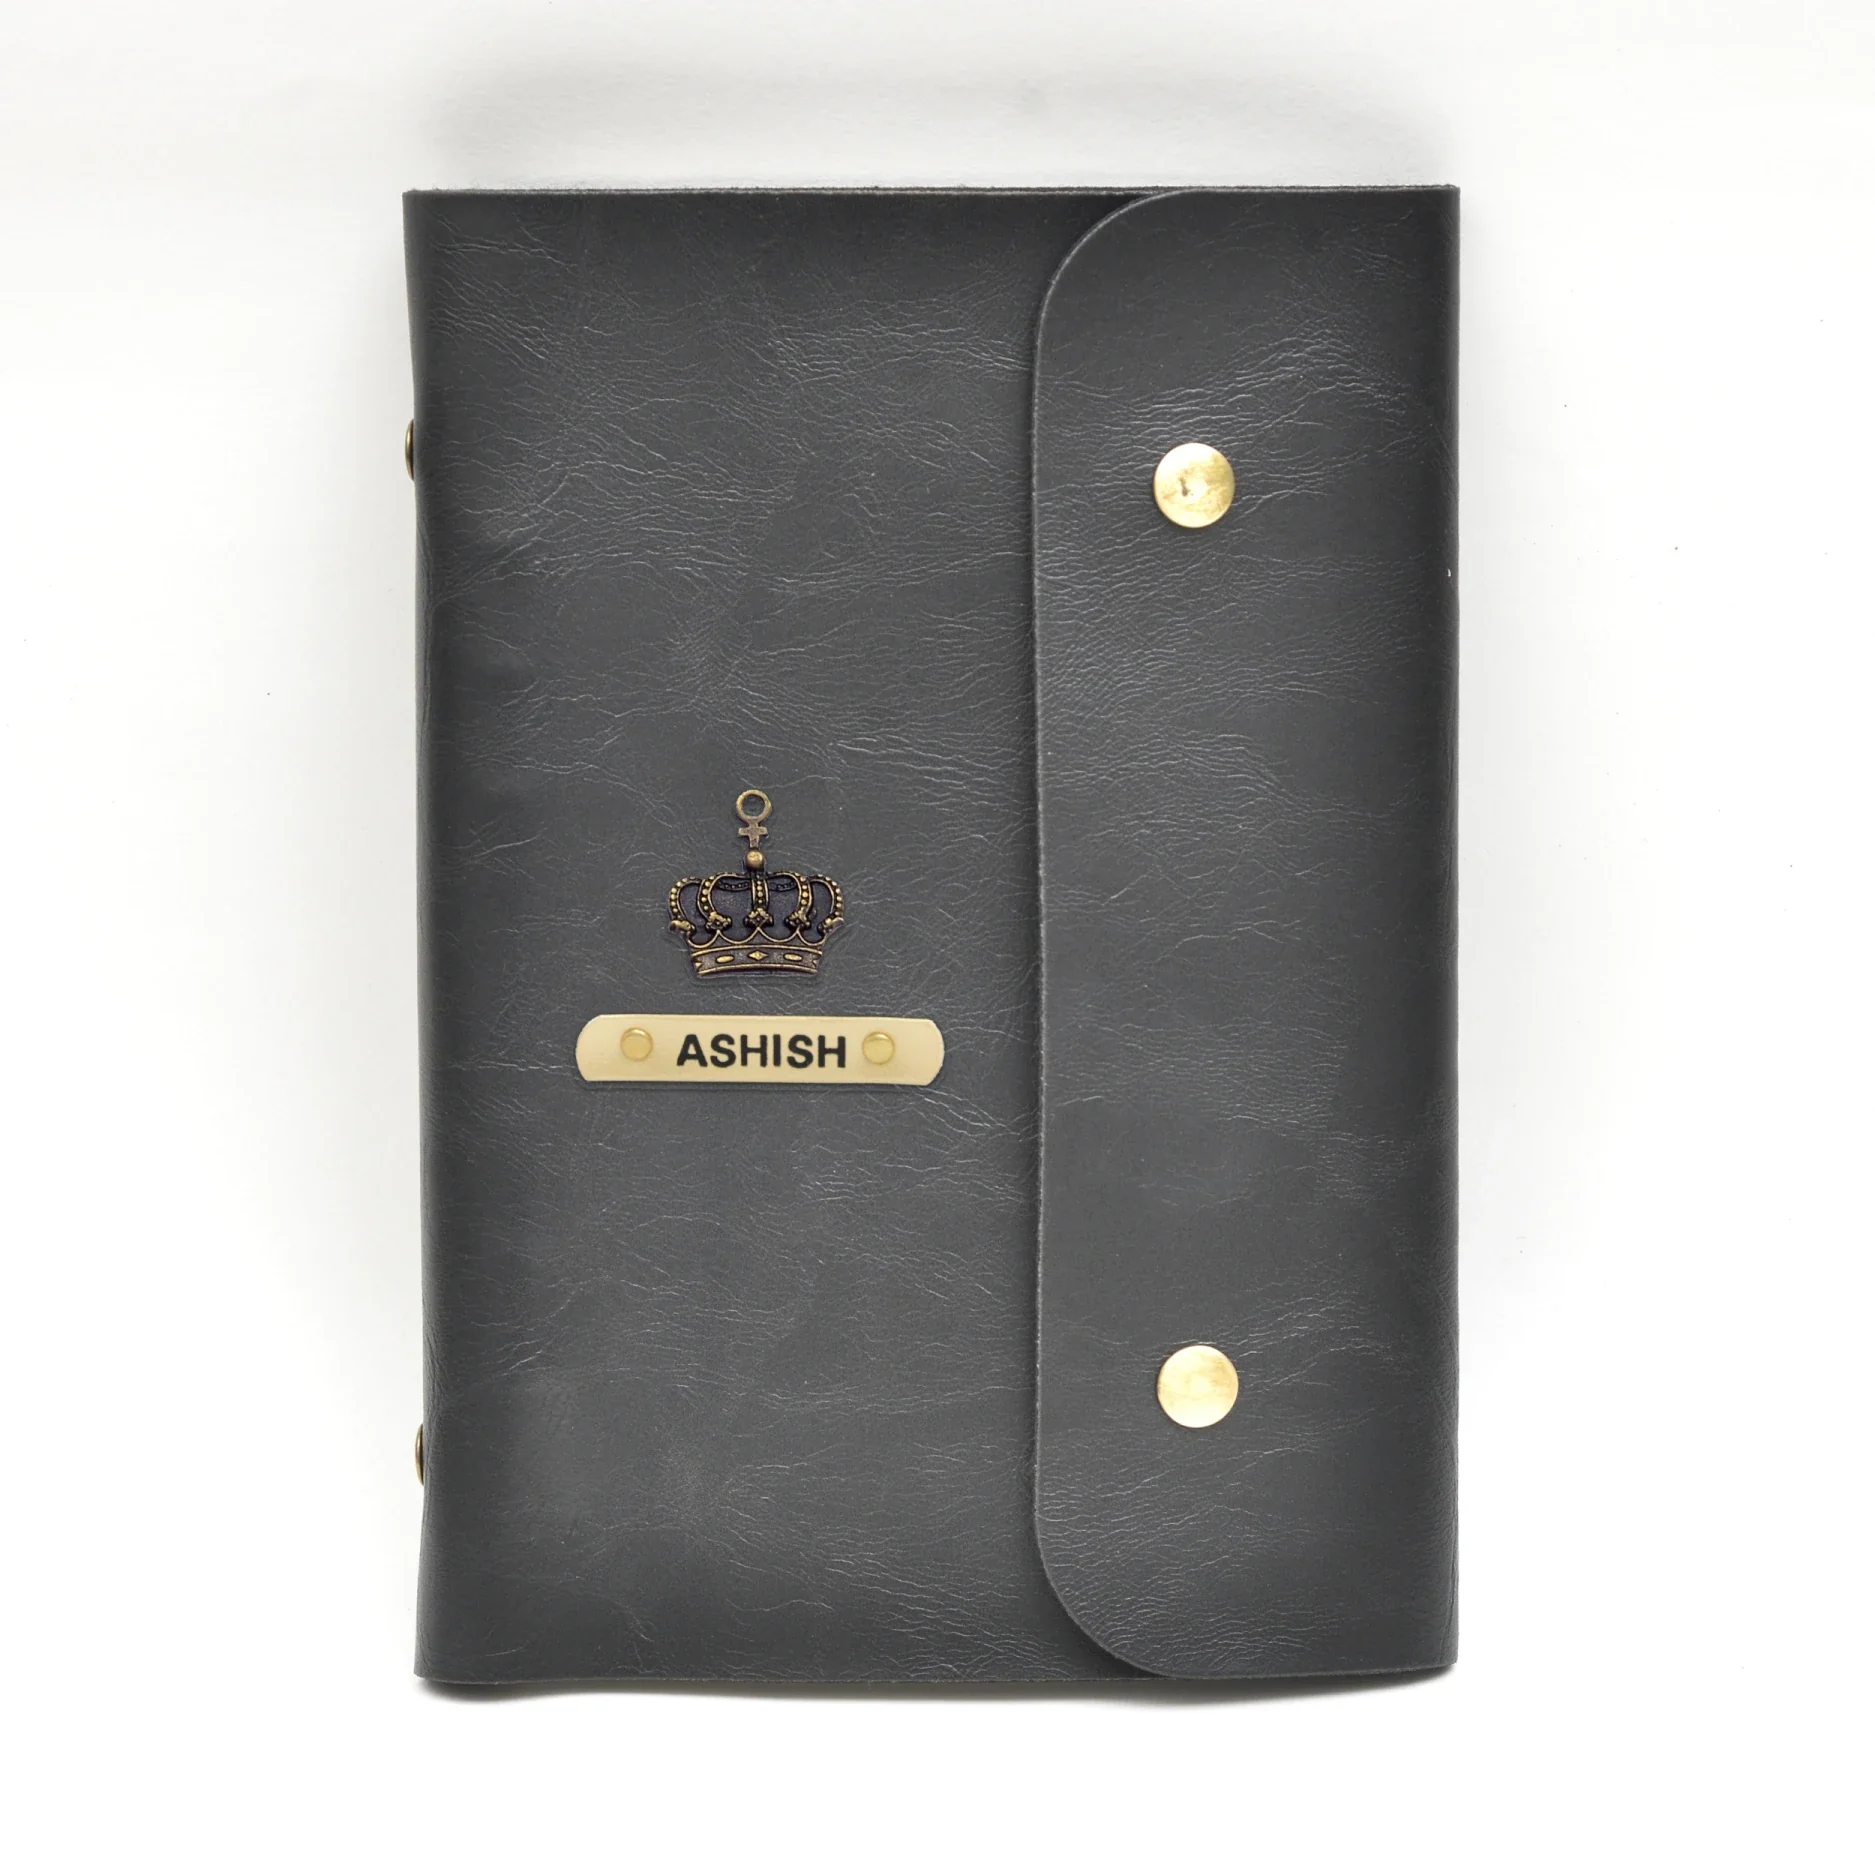 Keep your thoughts organized in style with our customized leather buttoned diary. Perfect for any occasion, our elegant designs are sure to impress.